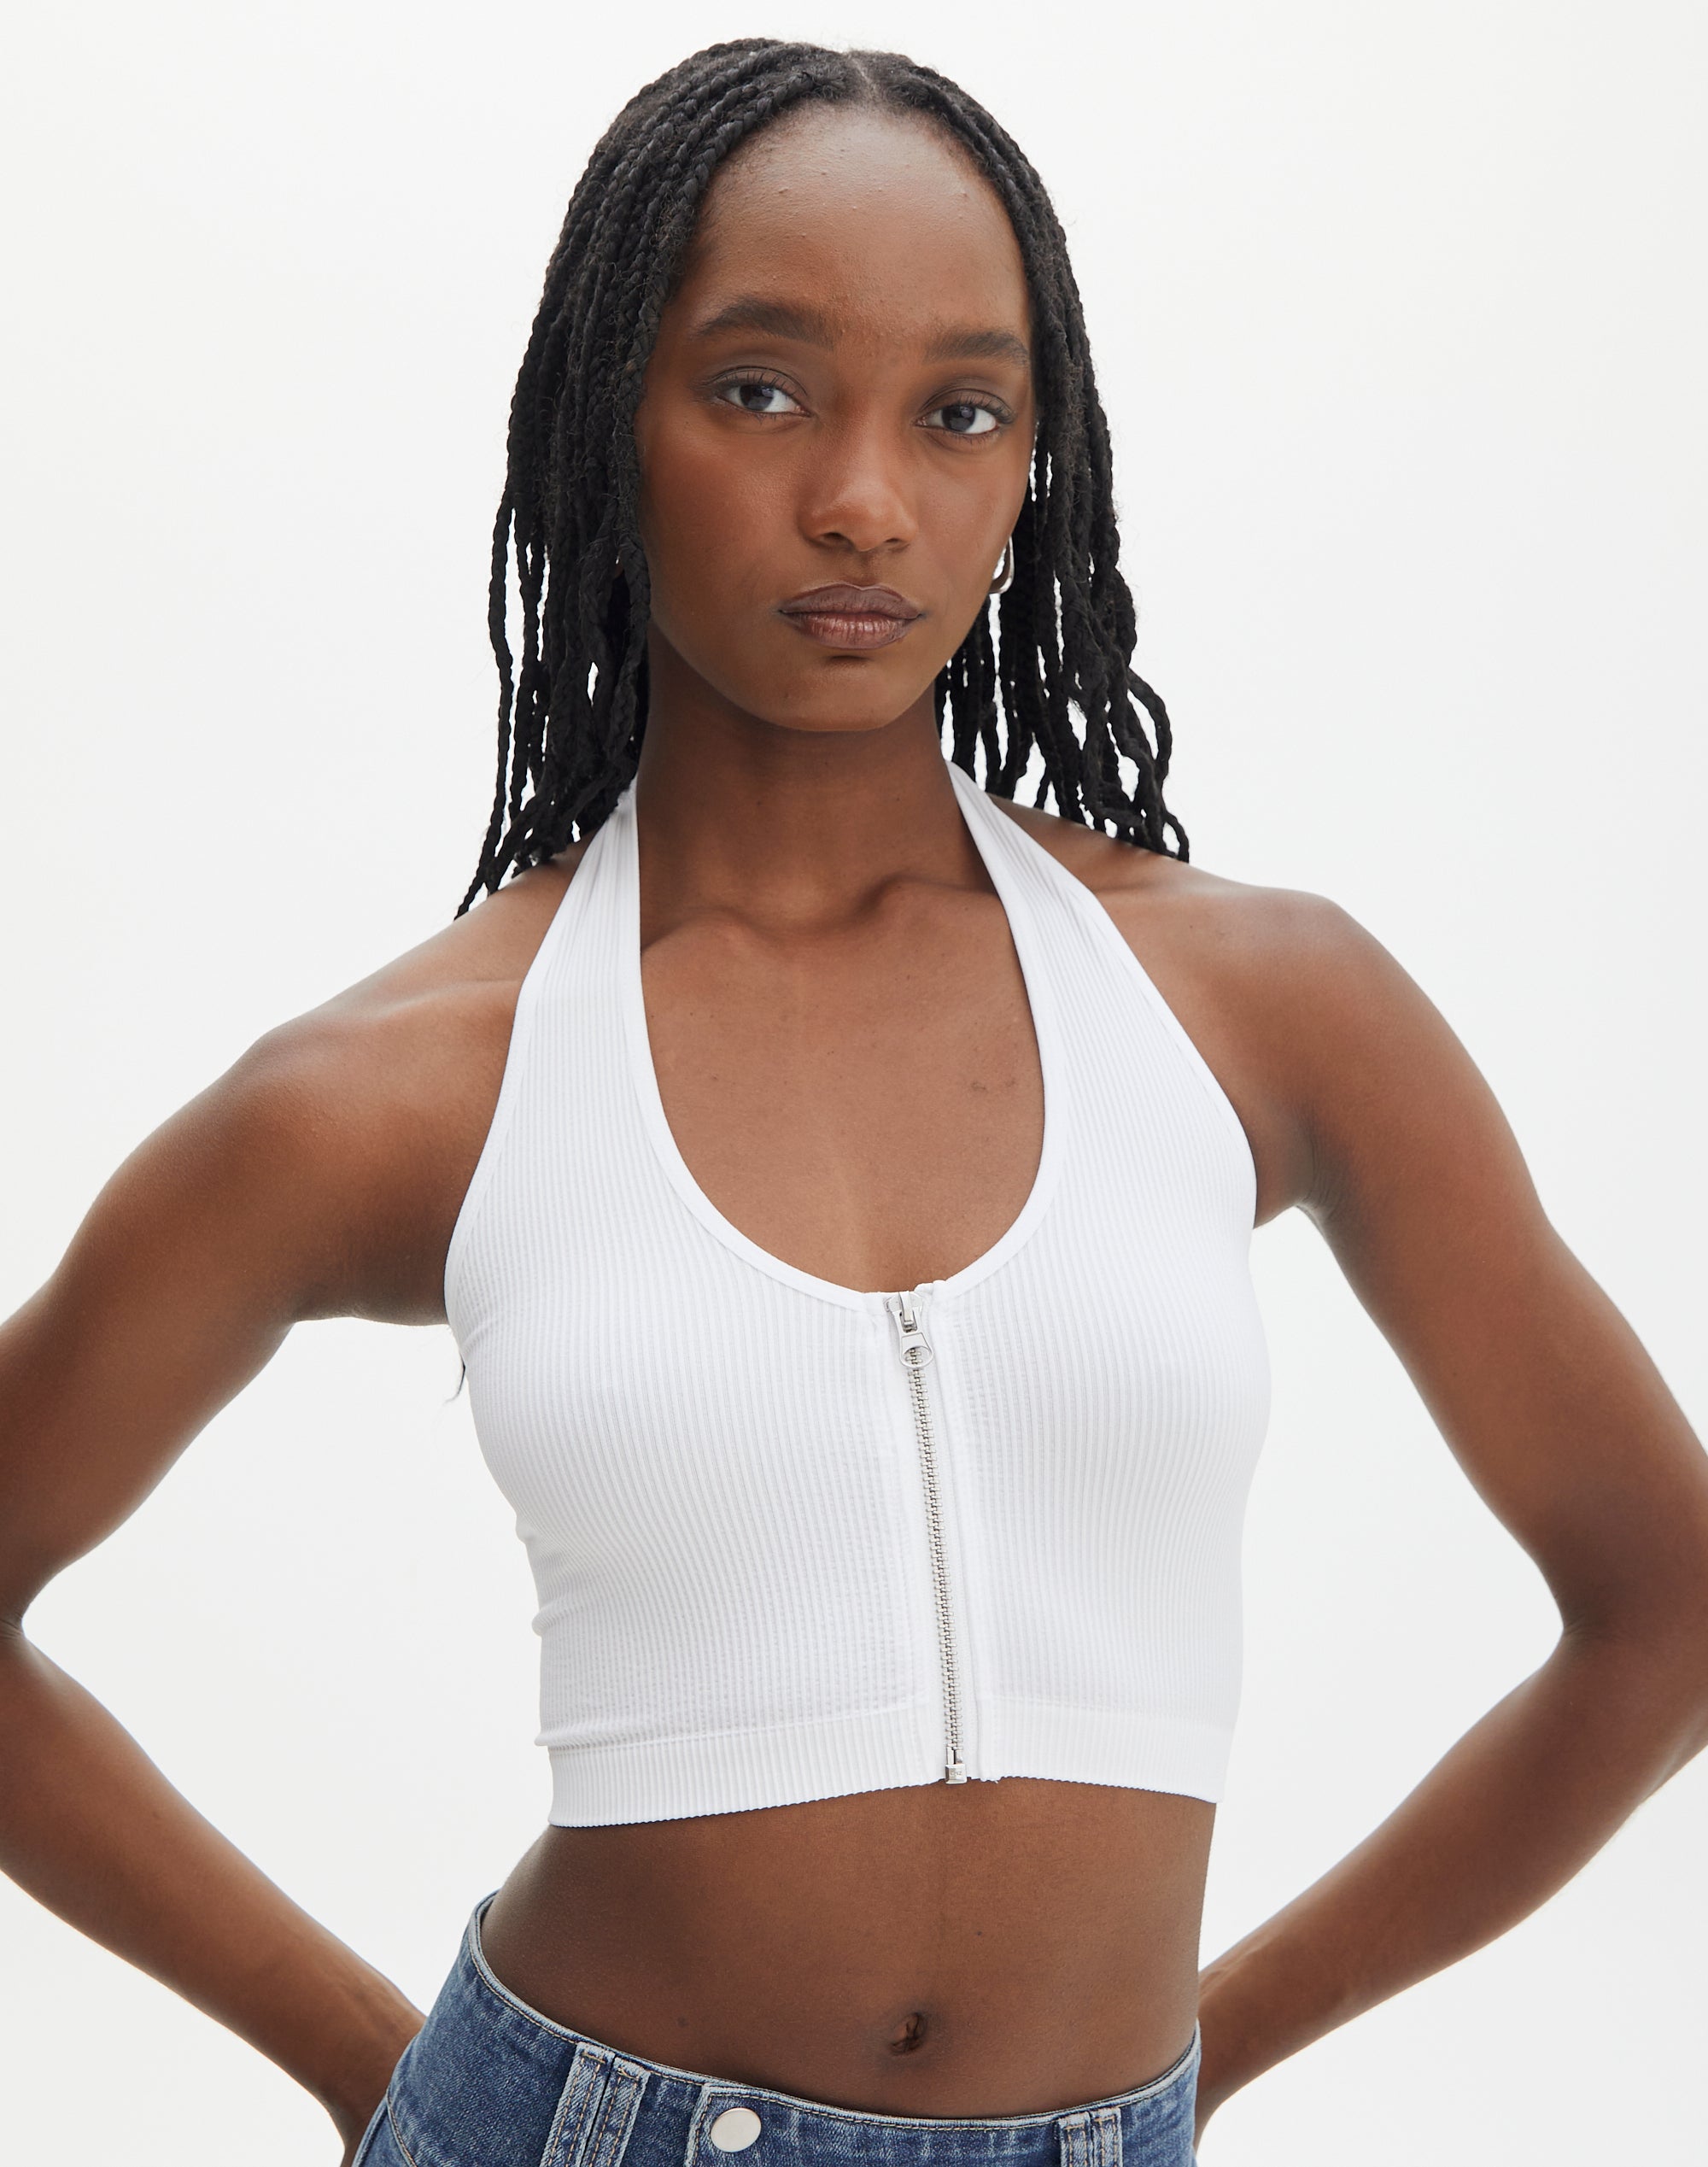 Glassons Halter Top White Size 6 - $30 New With Tags - From Alison